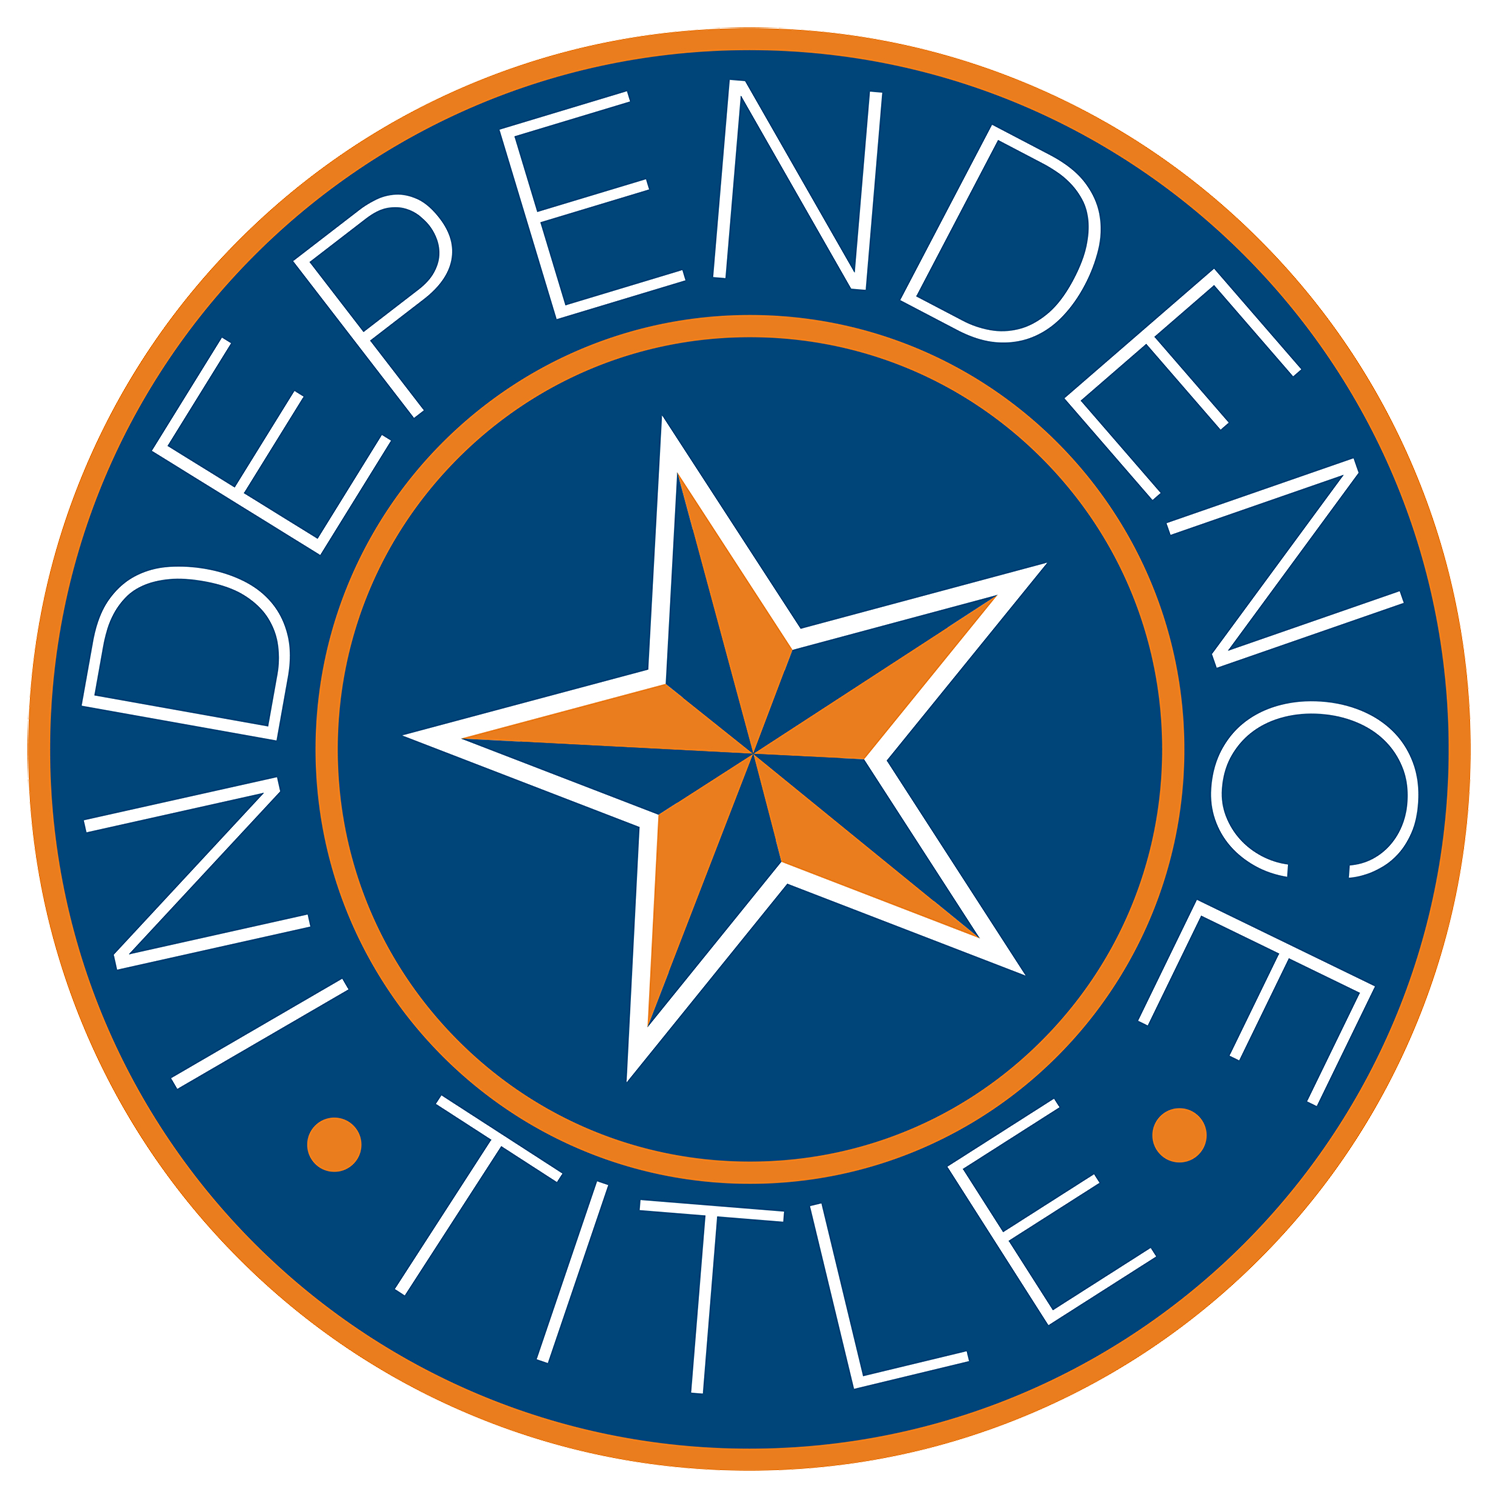 Independence title company logo